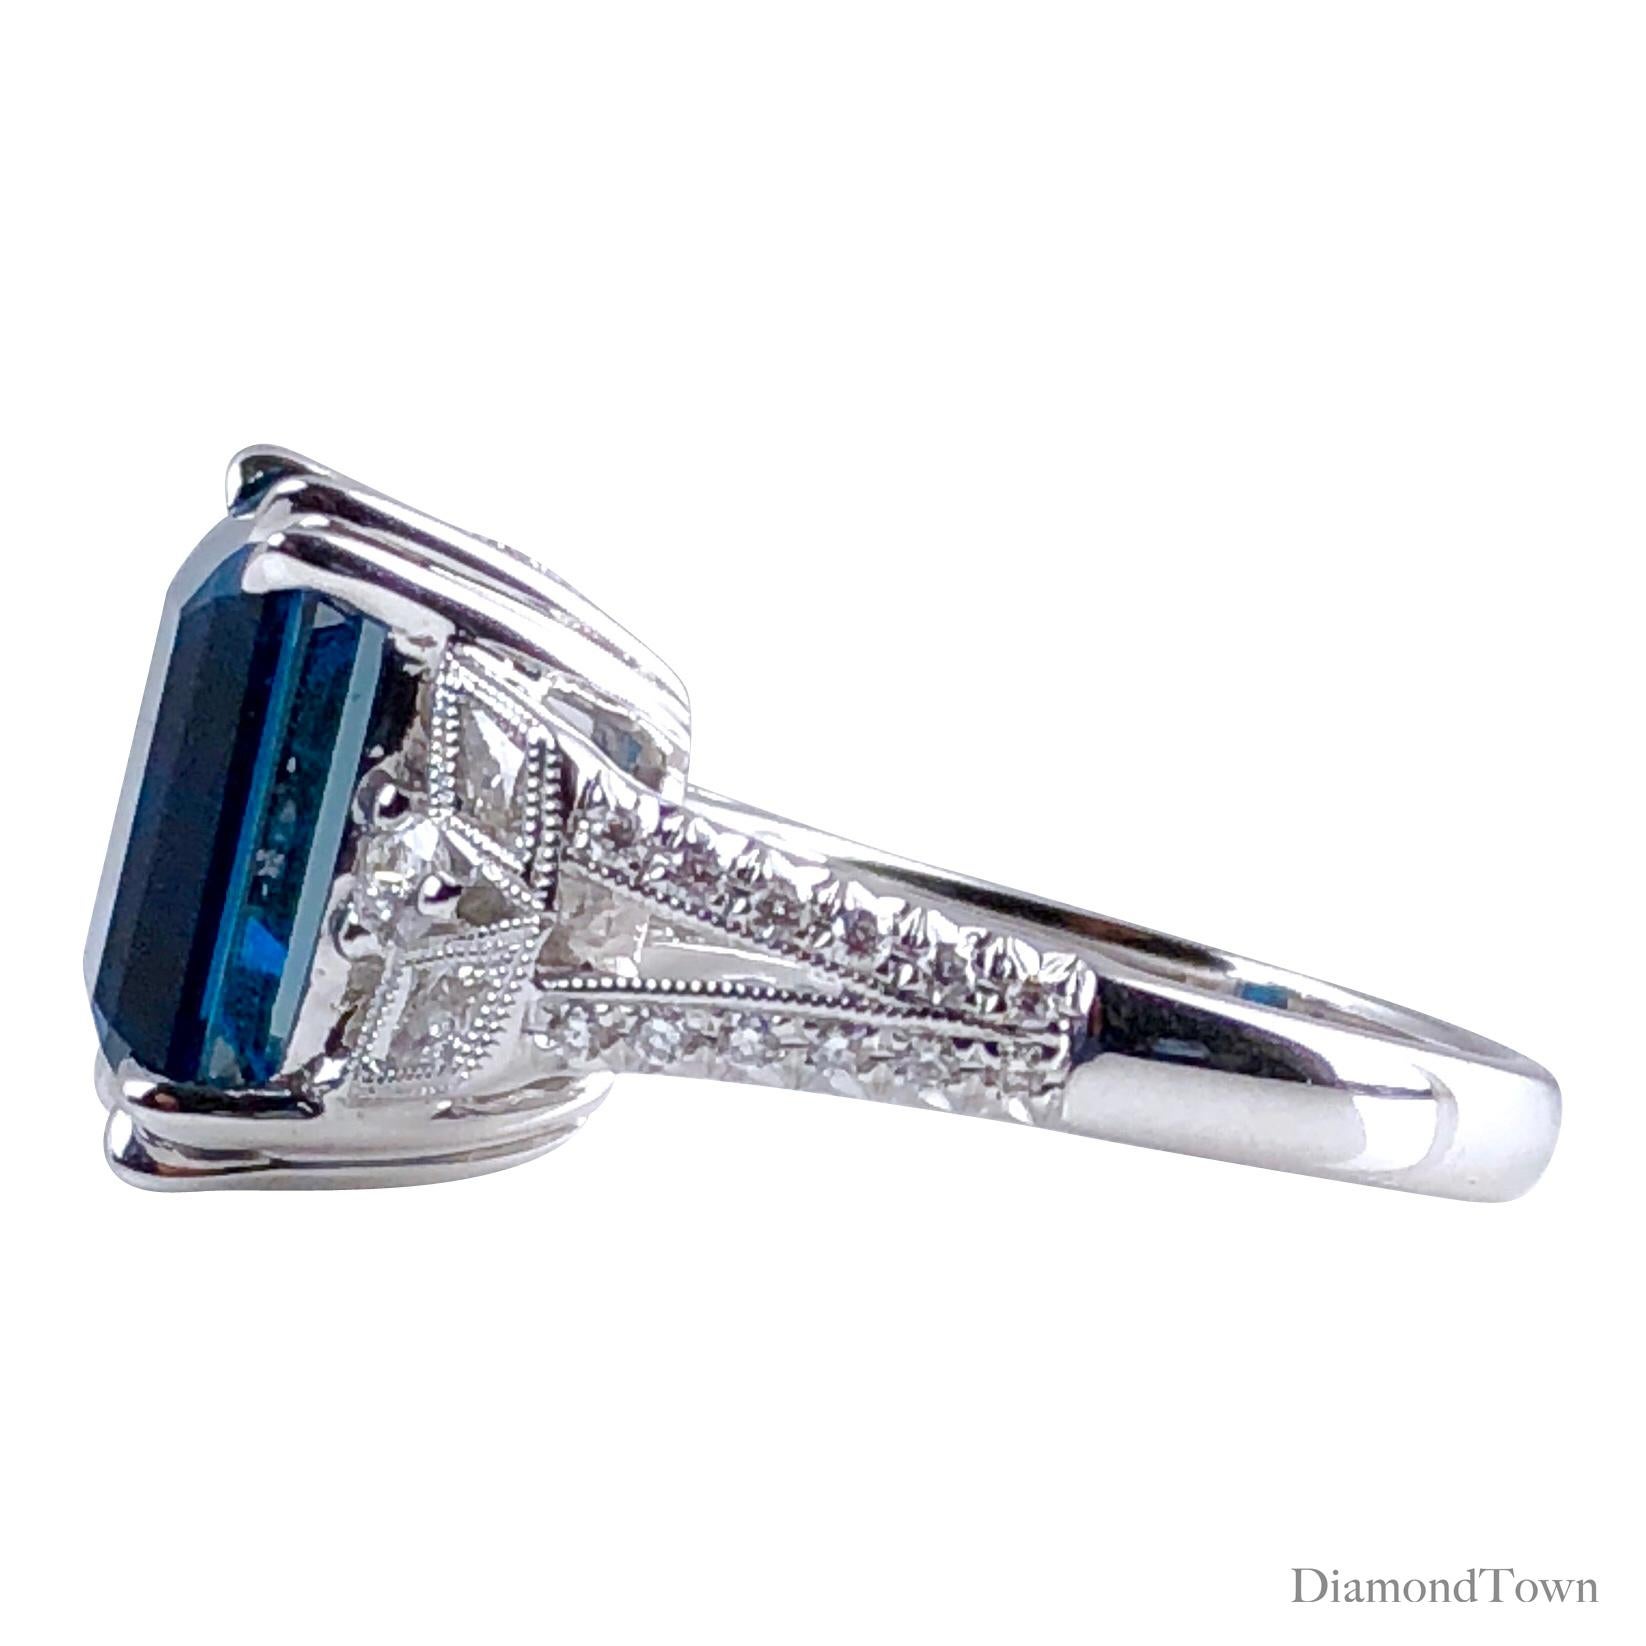 (DiamondTown) This stunning ring features a gorgeous 8.29 carat Emerald Cut Vivid Blue Topaz center, flanked by intricately detailed diamond work on all sides (total diamond weight 0.42 ct). Hand engraved milgrain work and additional diamonds down